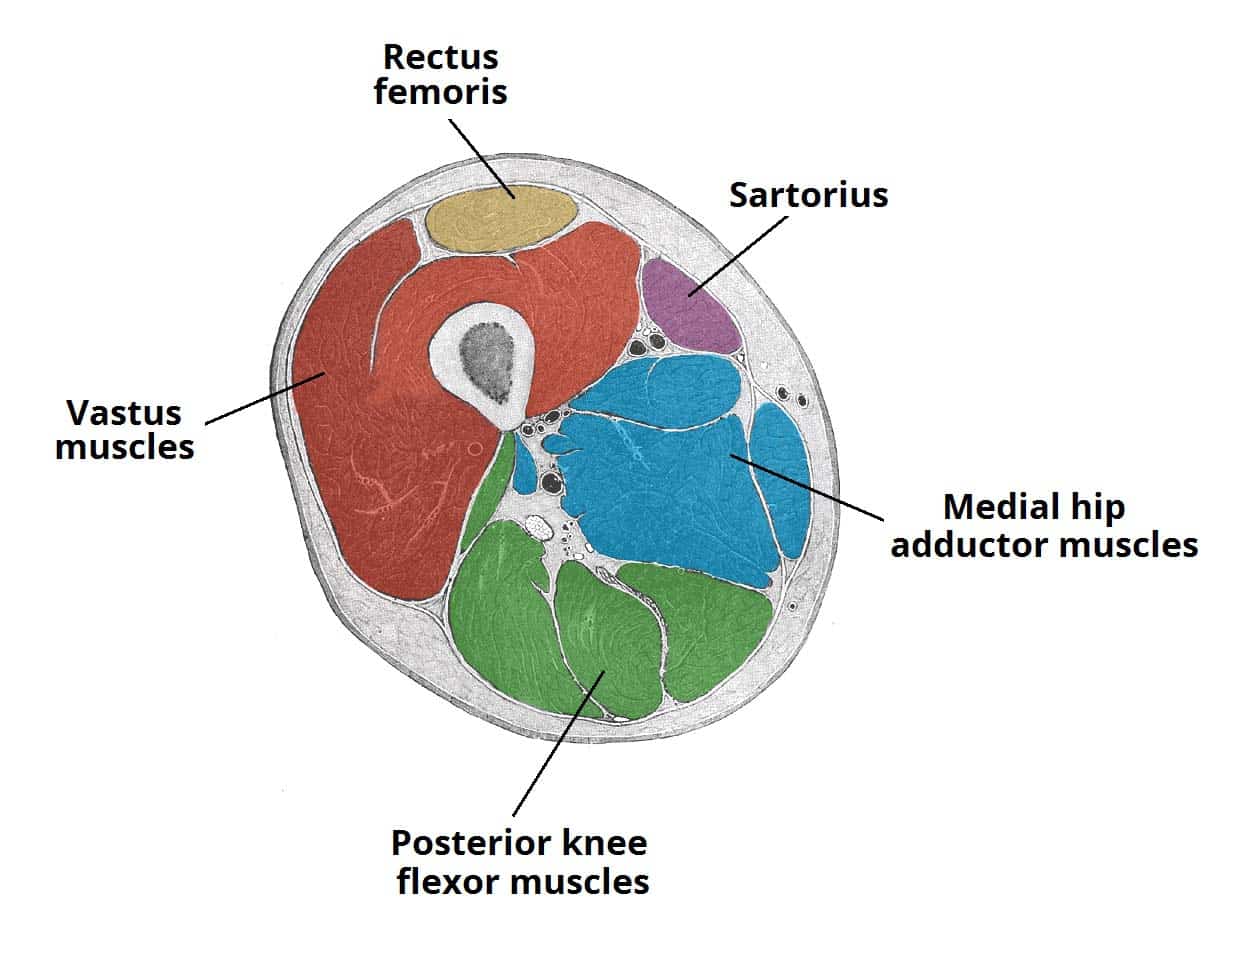 Fig 1.1 - Cross section of the distal thigh. The iliopsoas and pectineus muscles originate and attach in the proximal thigh, and hence are not included in this diagram.